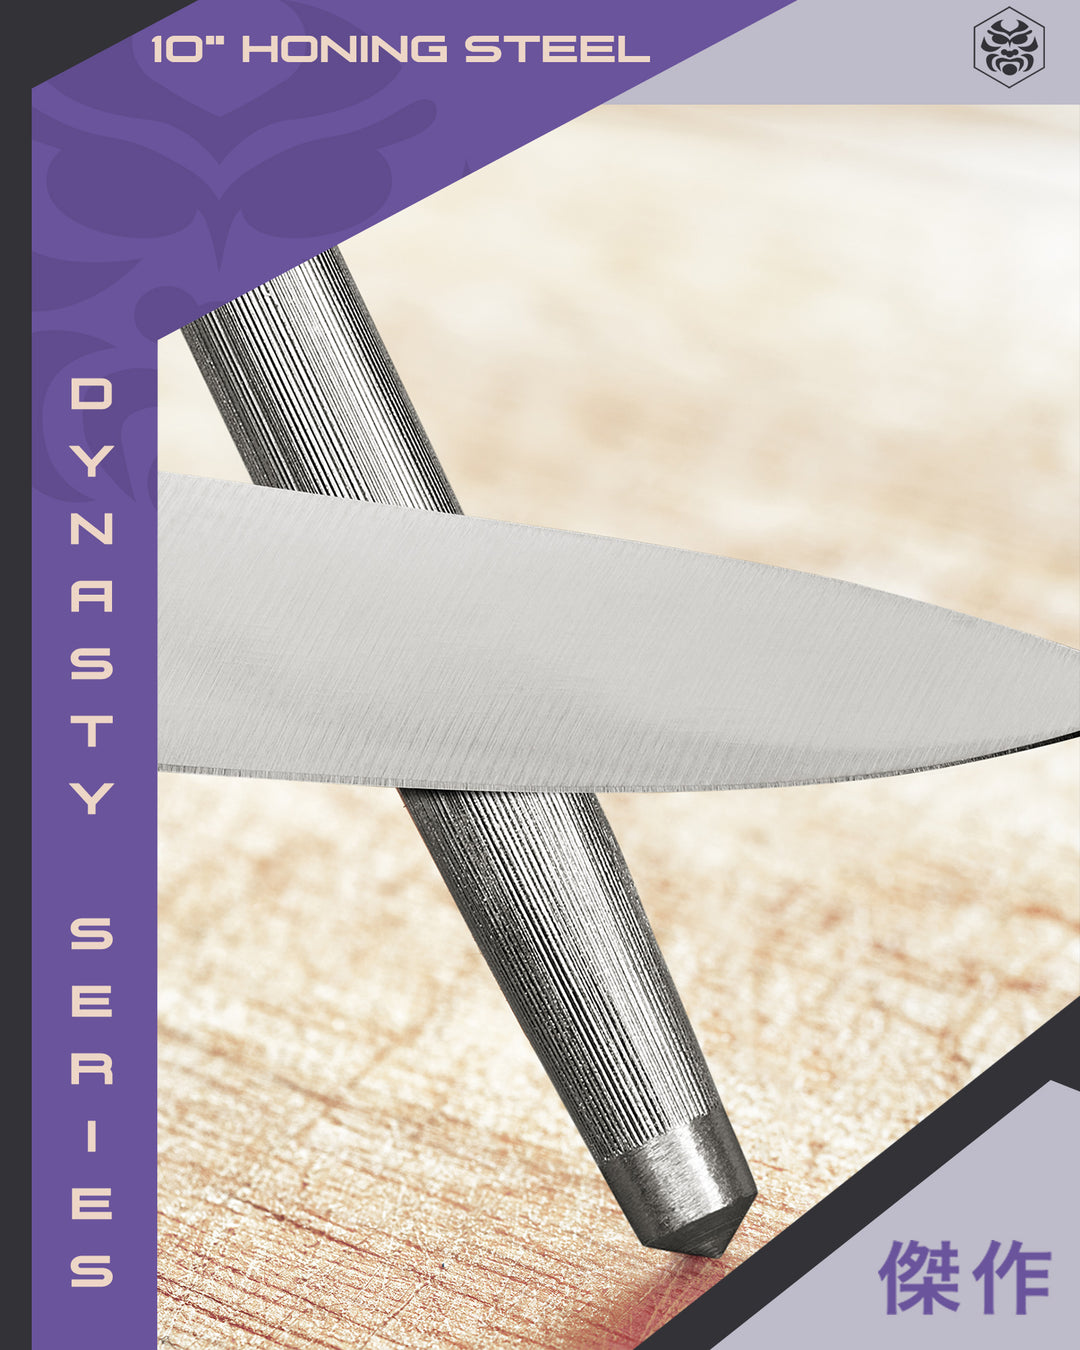 Detailed close up of a utility knife being honed using the Dynasty Sharpening Rod